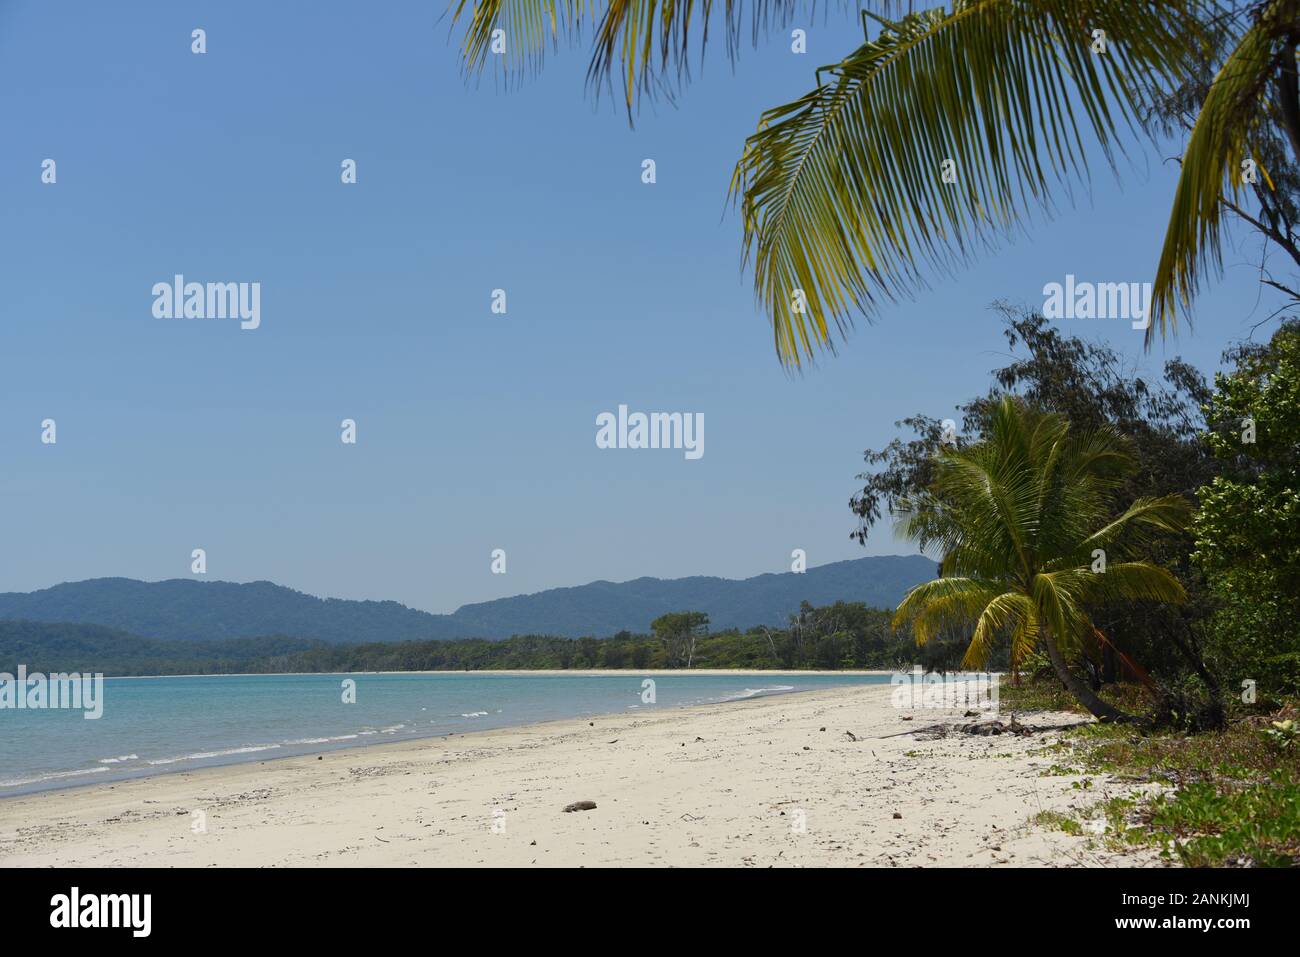 A full frame image of a tropical paradise on the gorgeous beach at Cape Tribulation, Australia Stock Photo